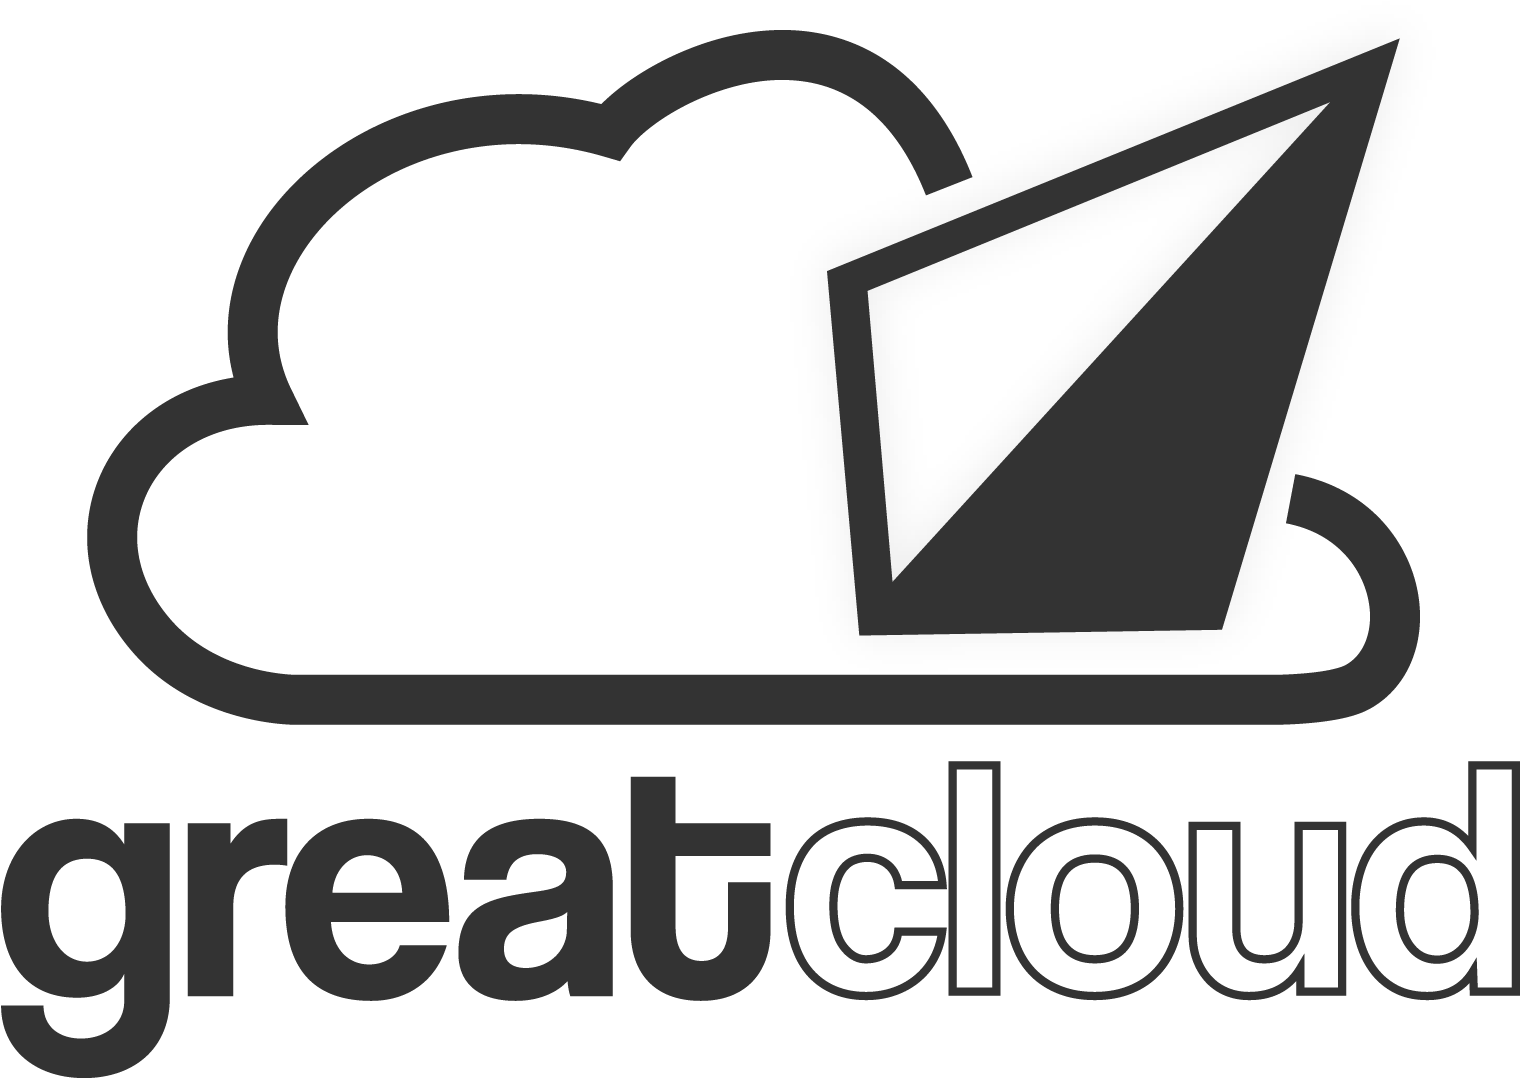 Greatcloud With Text In Grey - Creative Economy (1520x1111)